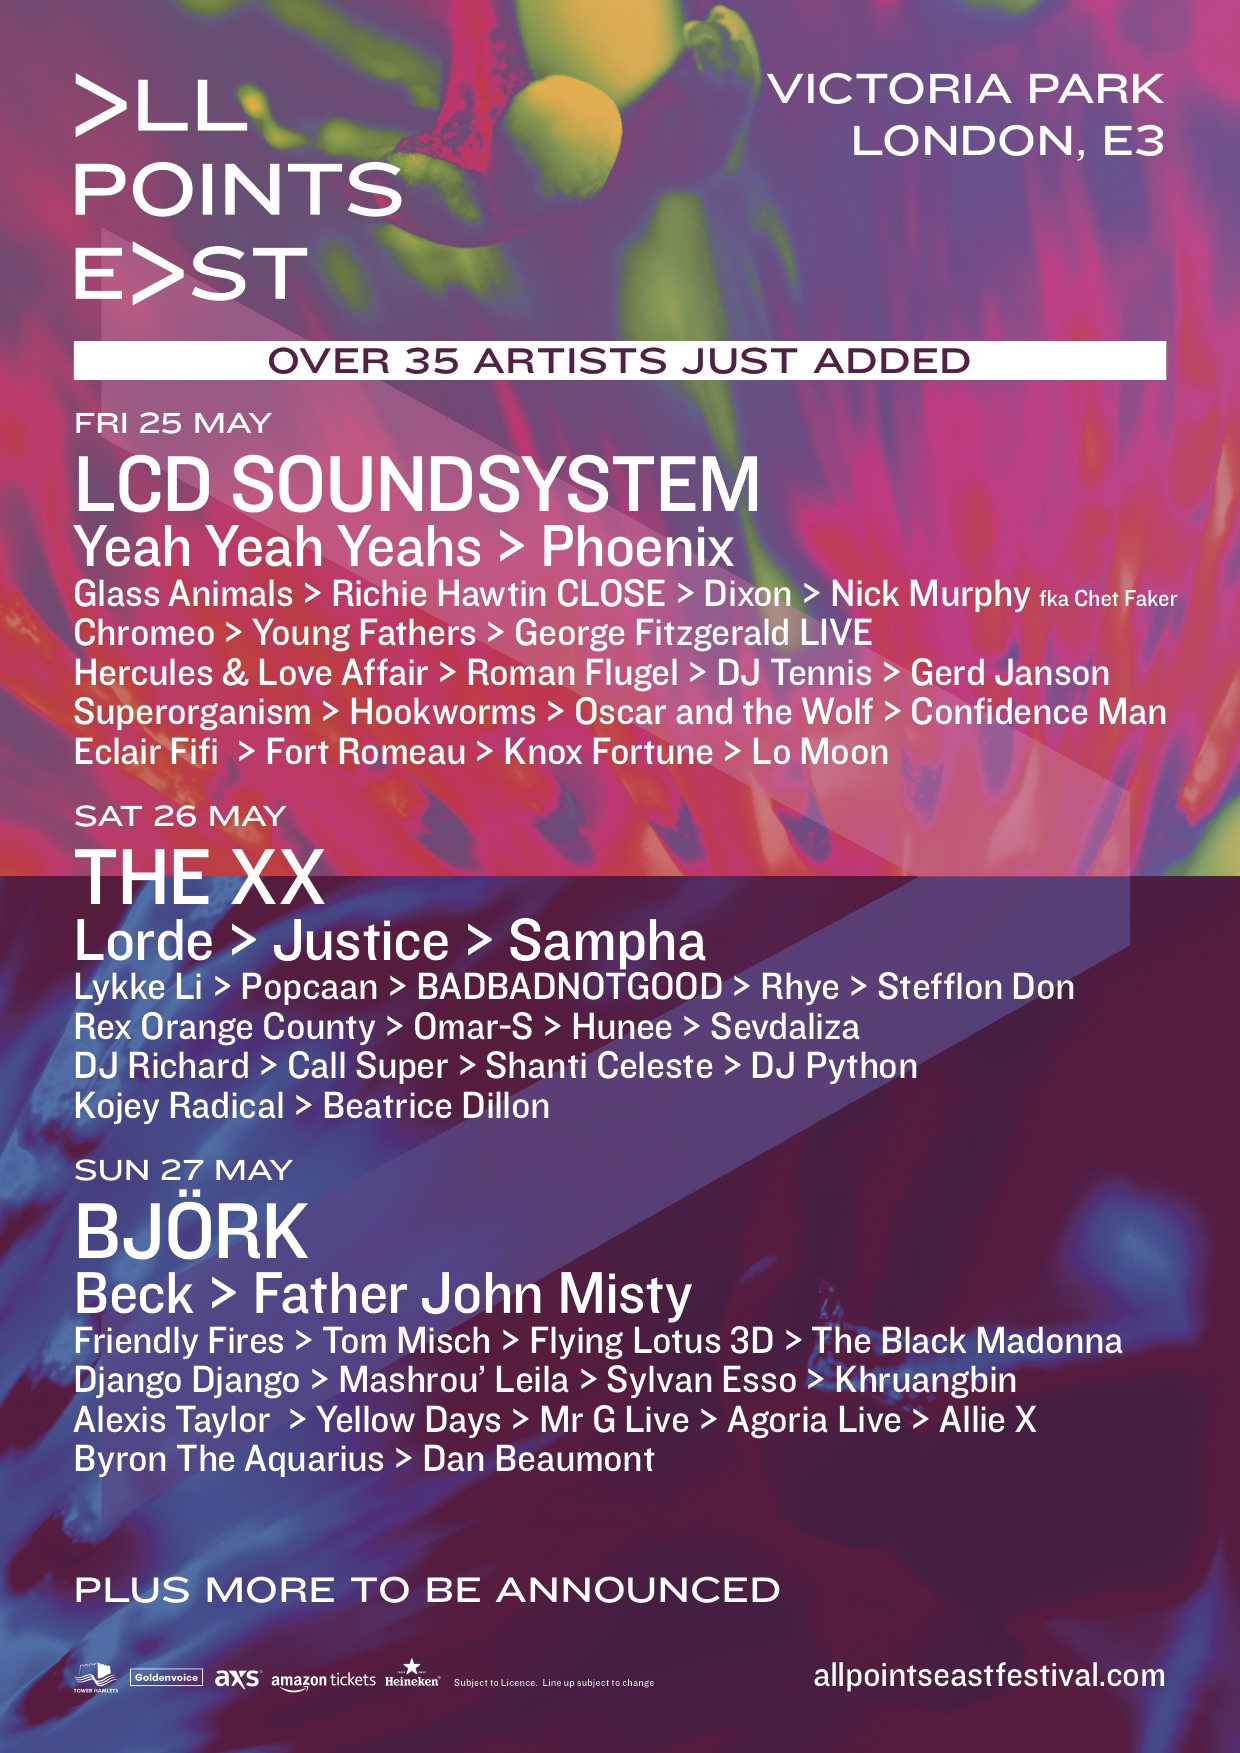 All Points East Festival Adds 38 New Names To Lineup